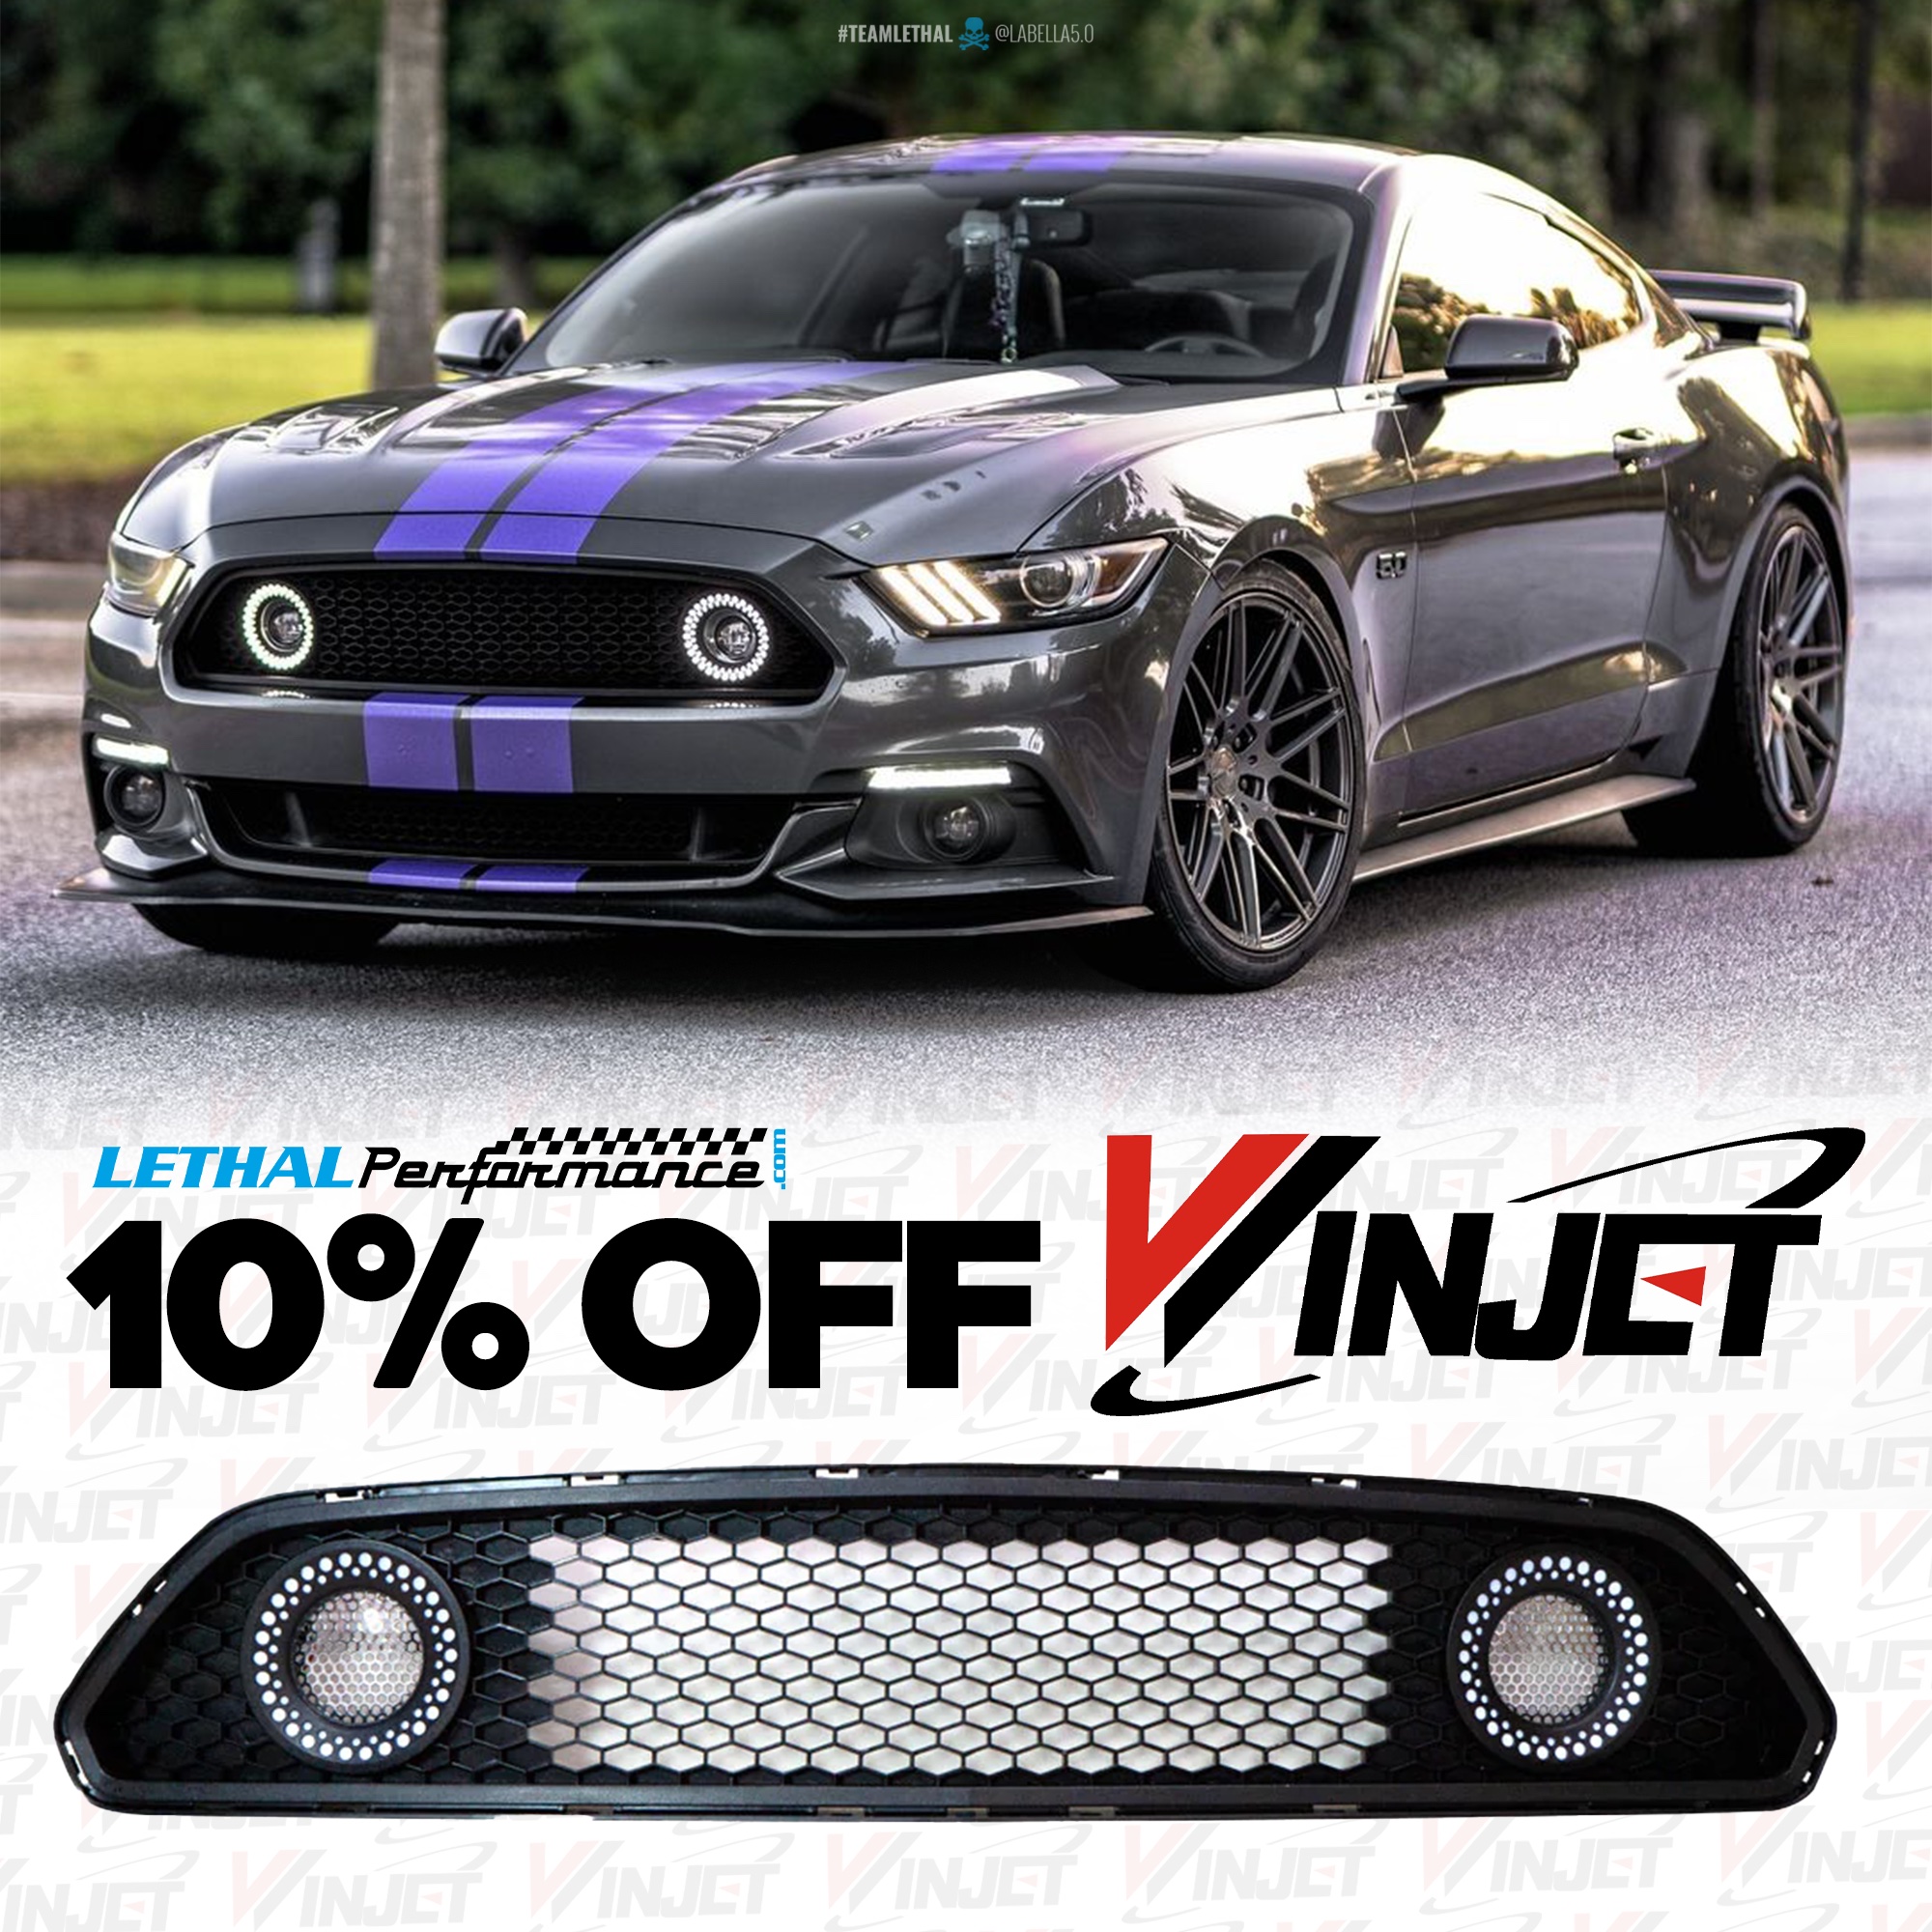 S650 Mustang WinJet 10% OFF sale here at Lethal Performance!! winjet labella5.0